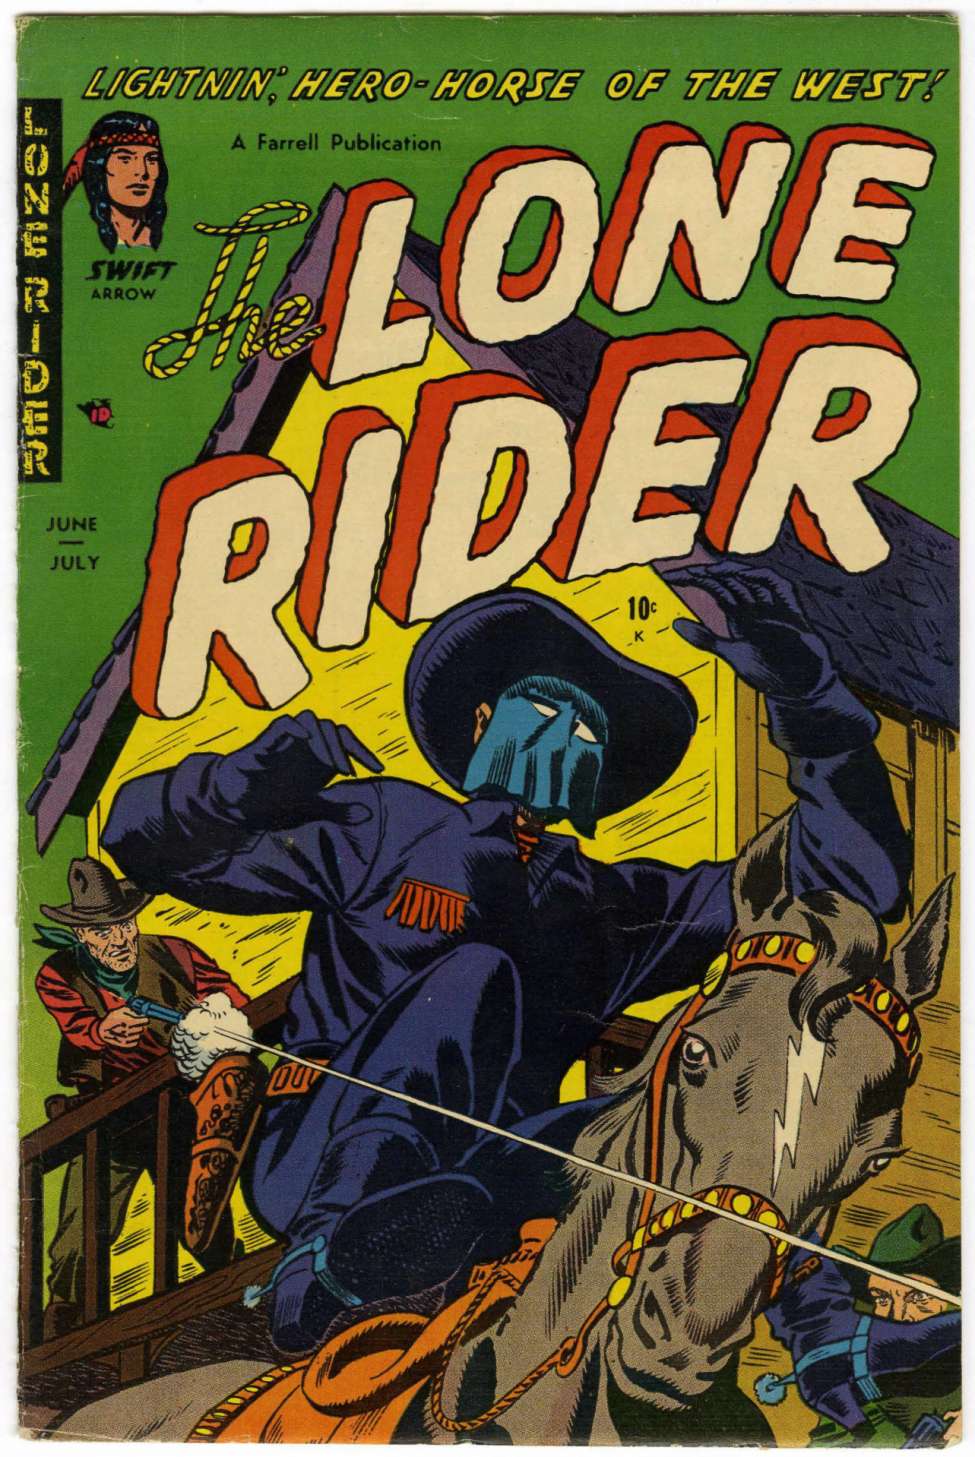 Book Cover For The Lone Rider 14 - Version 2